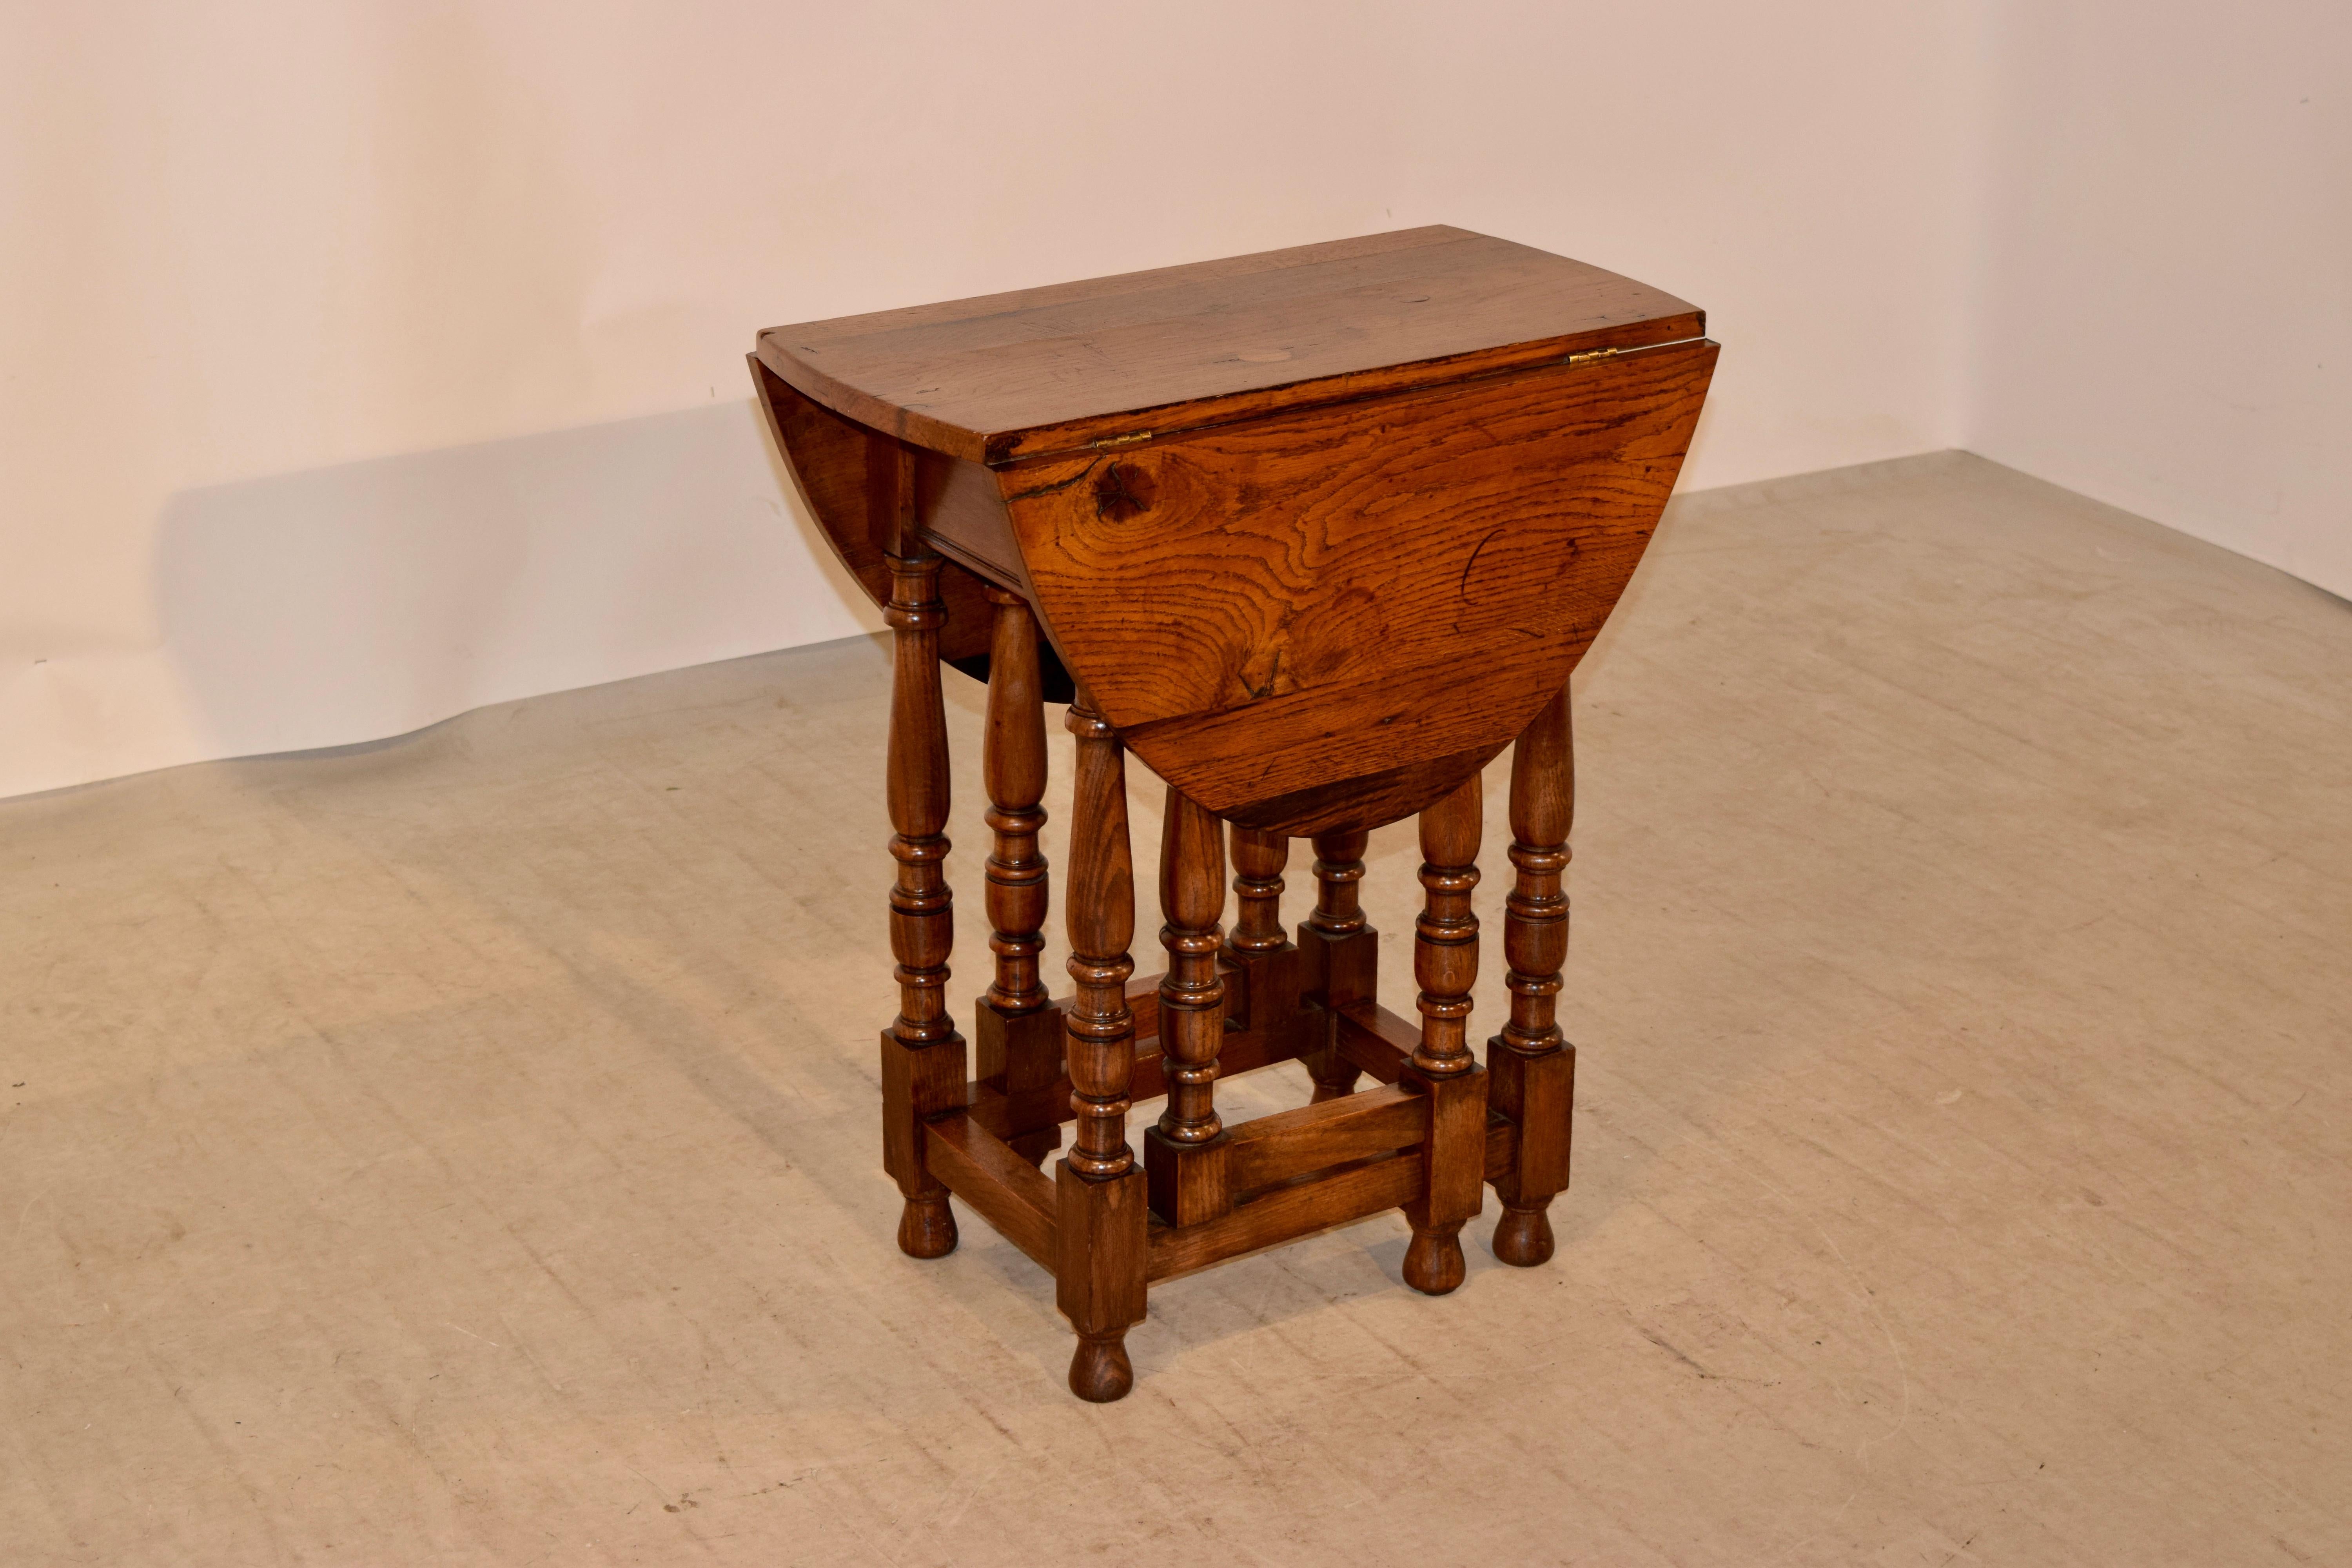 English gate leg table made from the wreckage of the famous HMS Foudroyant battle ship, circa 1900 which was in use from 1798- 1815. She has a fascinating history and was Lord Nelson's flagship from 1799 until 1801. The ship eventually was docked in